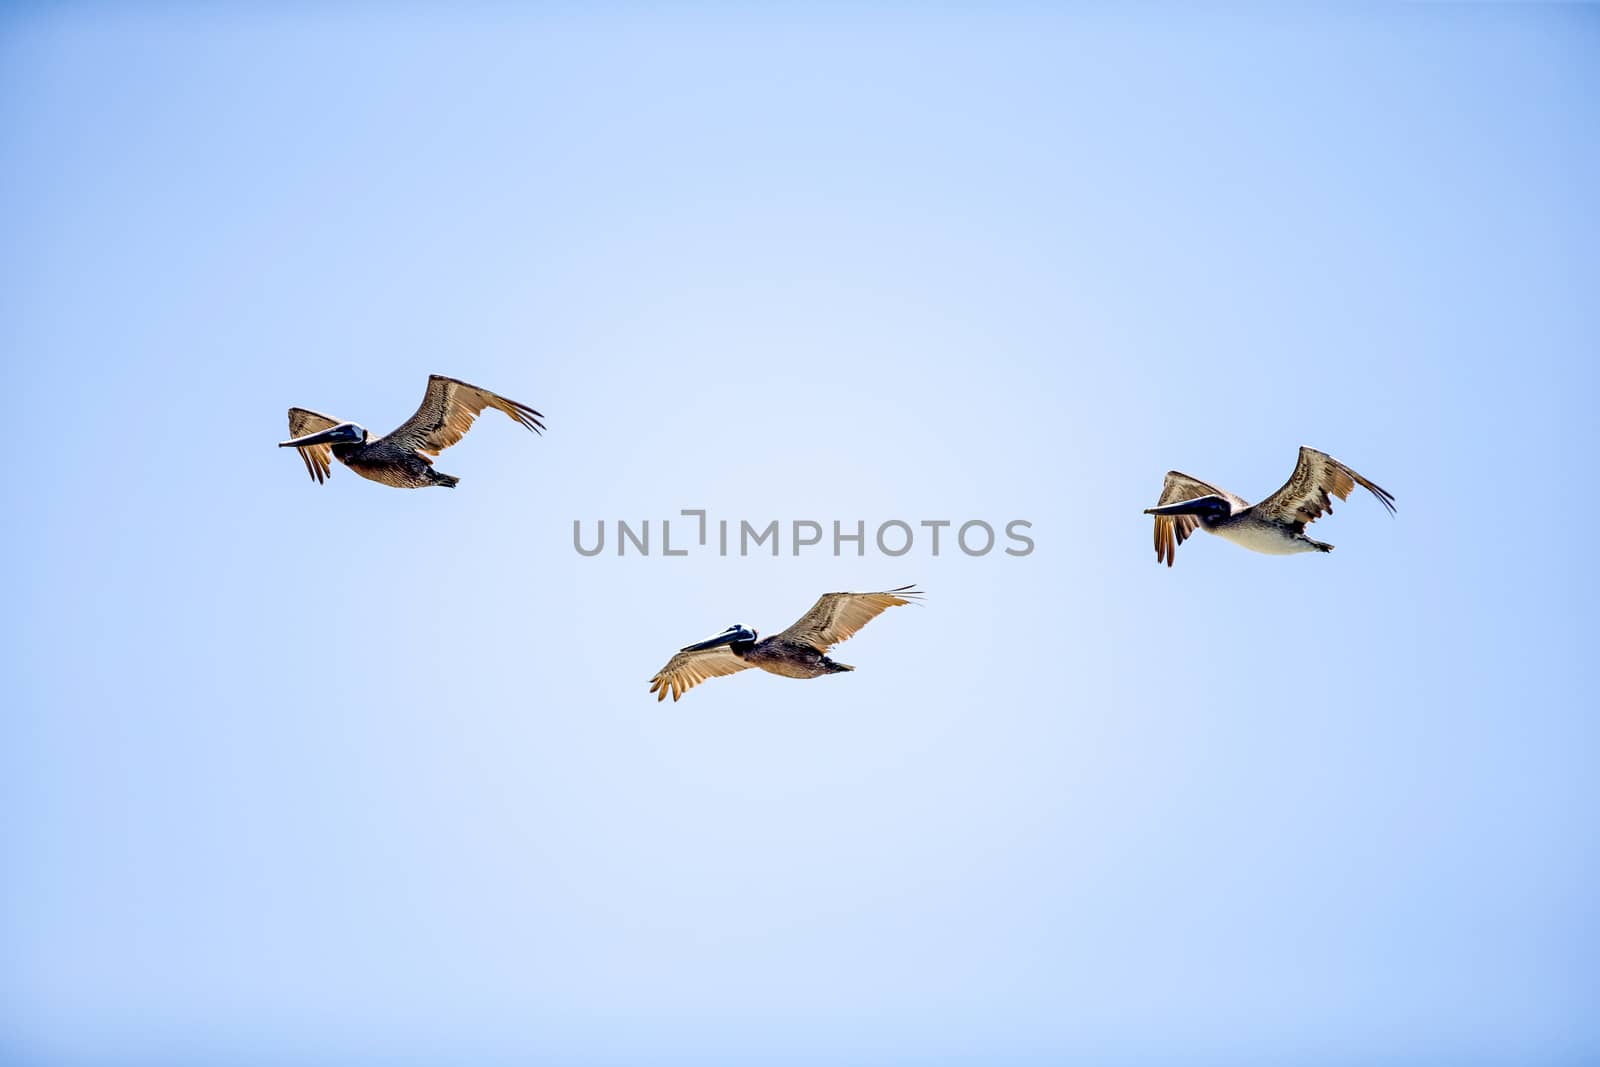 Flock of Pelicans by thomas_males